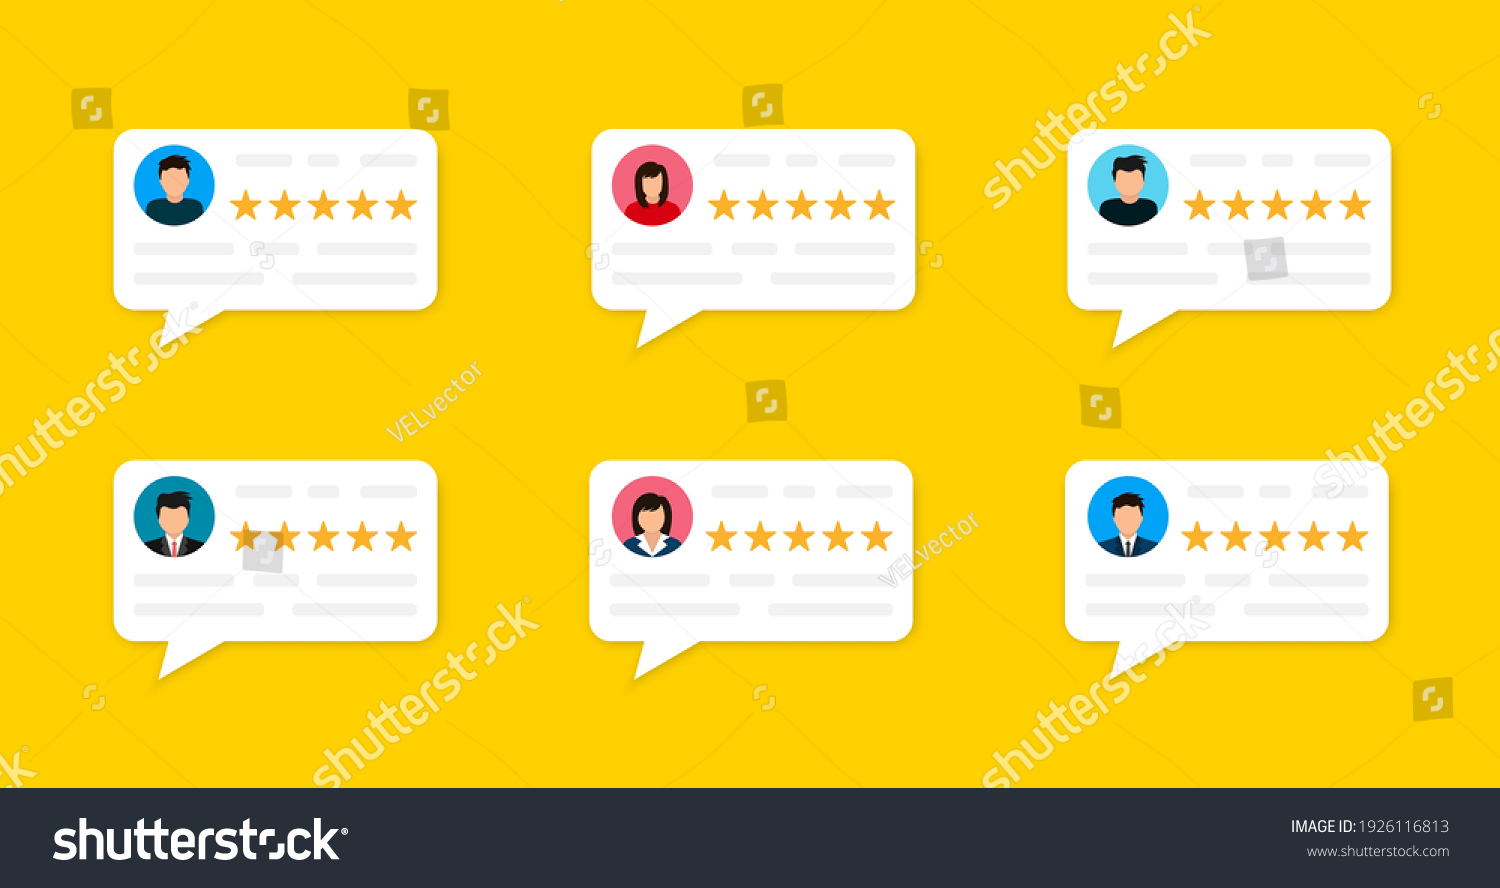 User reviews and feedback concept. User reviews online. Customer feedback review experience rating concept. User client service message. Vector illustration. EPS 10 #1926116813